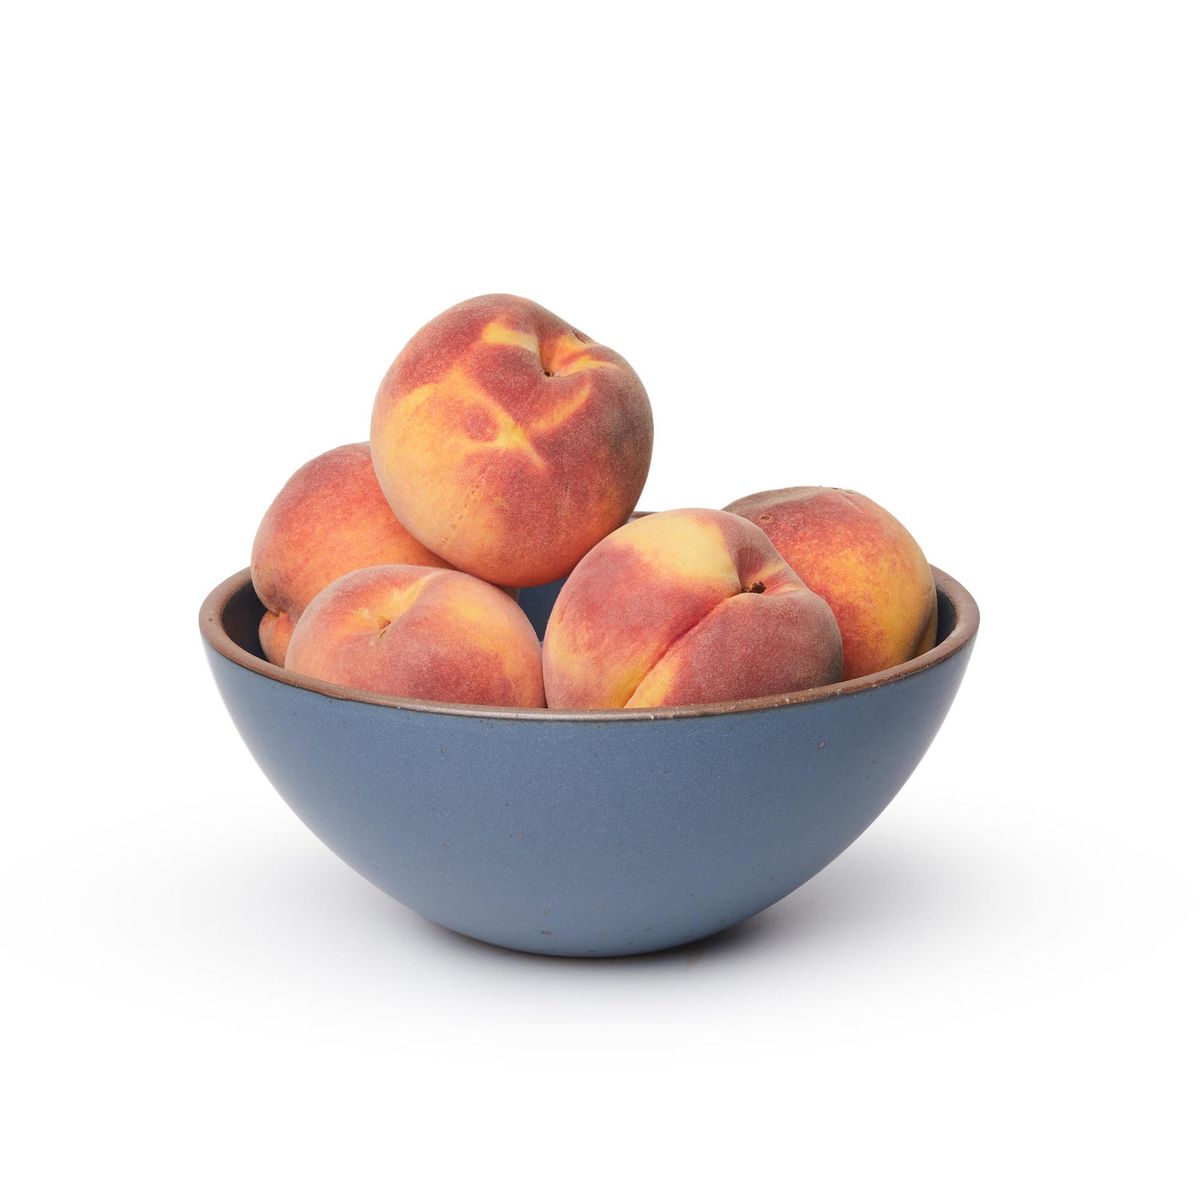 A large rounded ceramic bowl in a toned-down navy color featuring iron speckles and an unglazed rim, filled with peaches